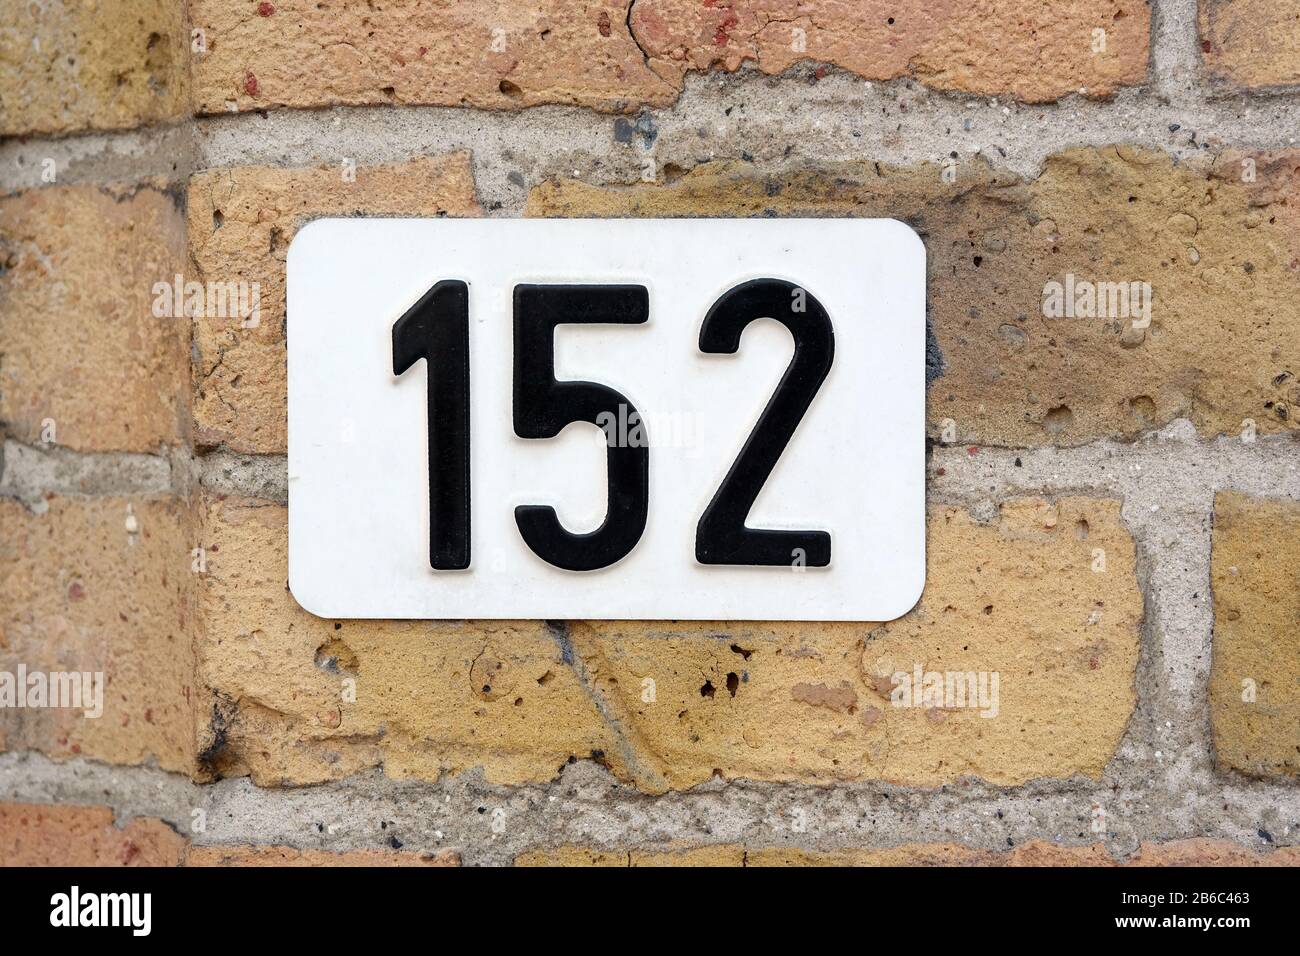 House Number 152 sign Stock Photo